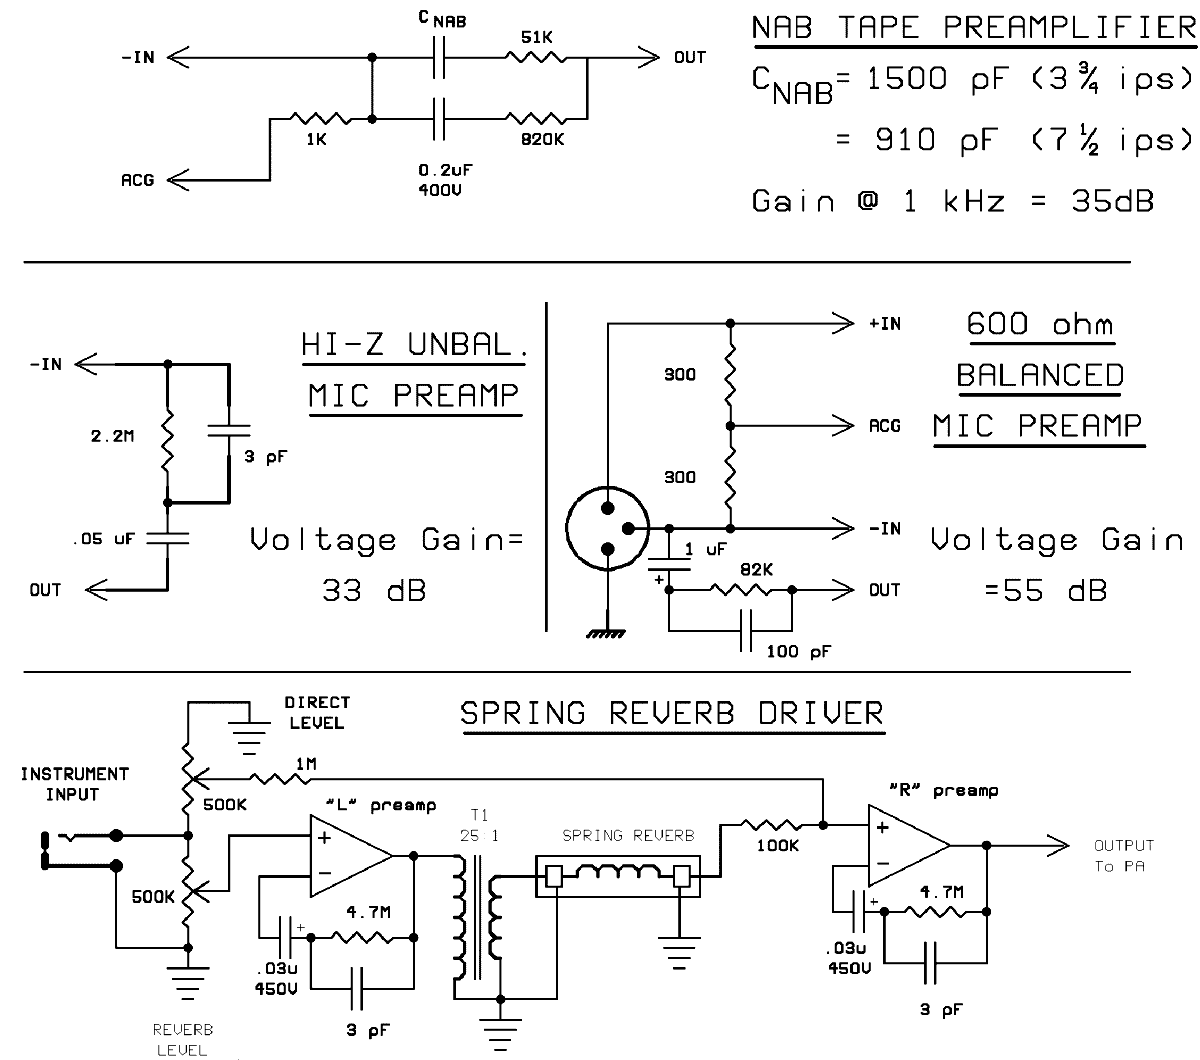 Other Preamp Applications